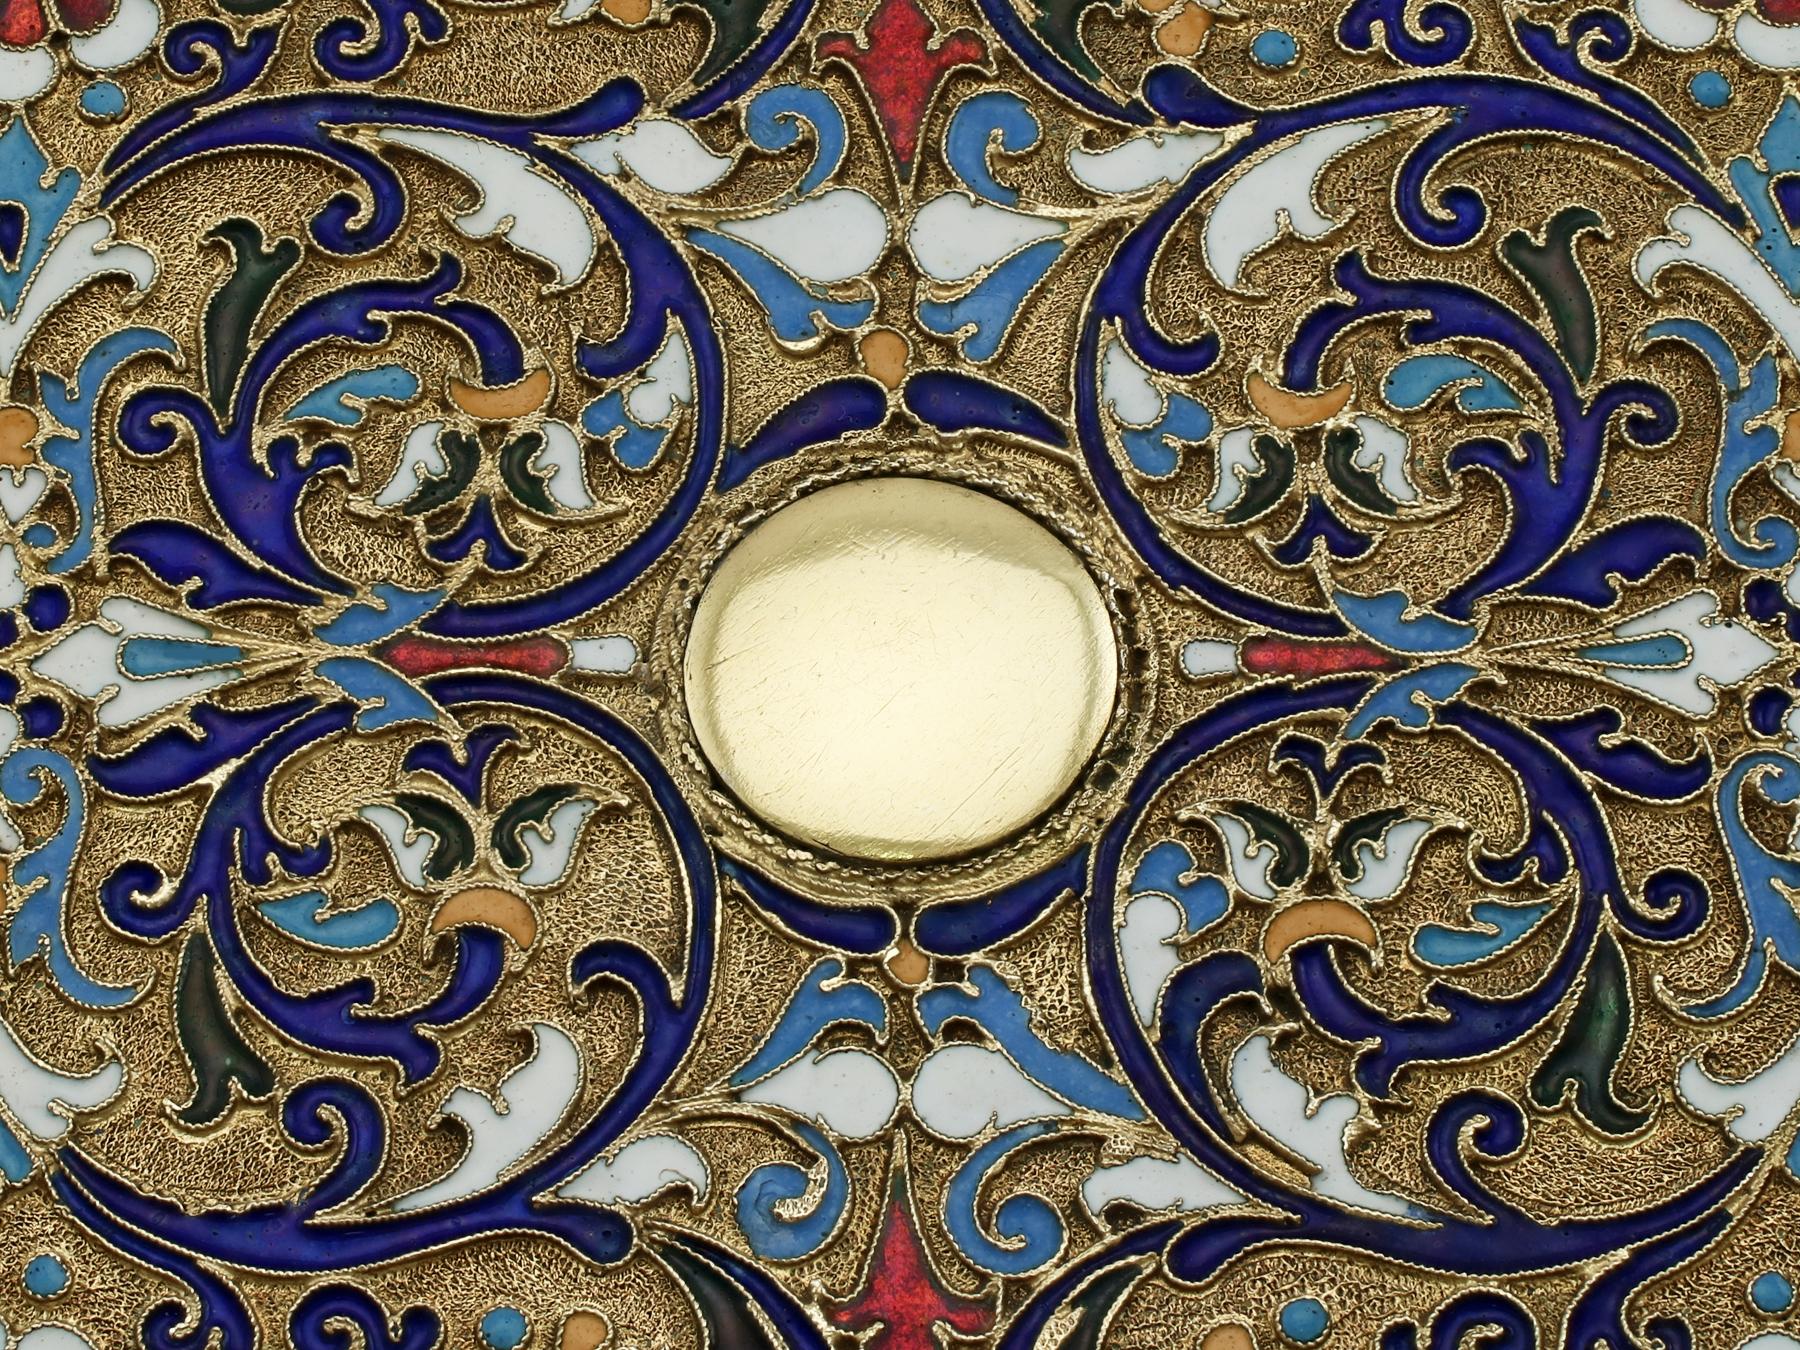 Late 19th Century Antique Russian Silver Gilt and Polychrome Cloisonné Enamel Tray, circa 1890